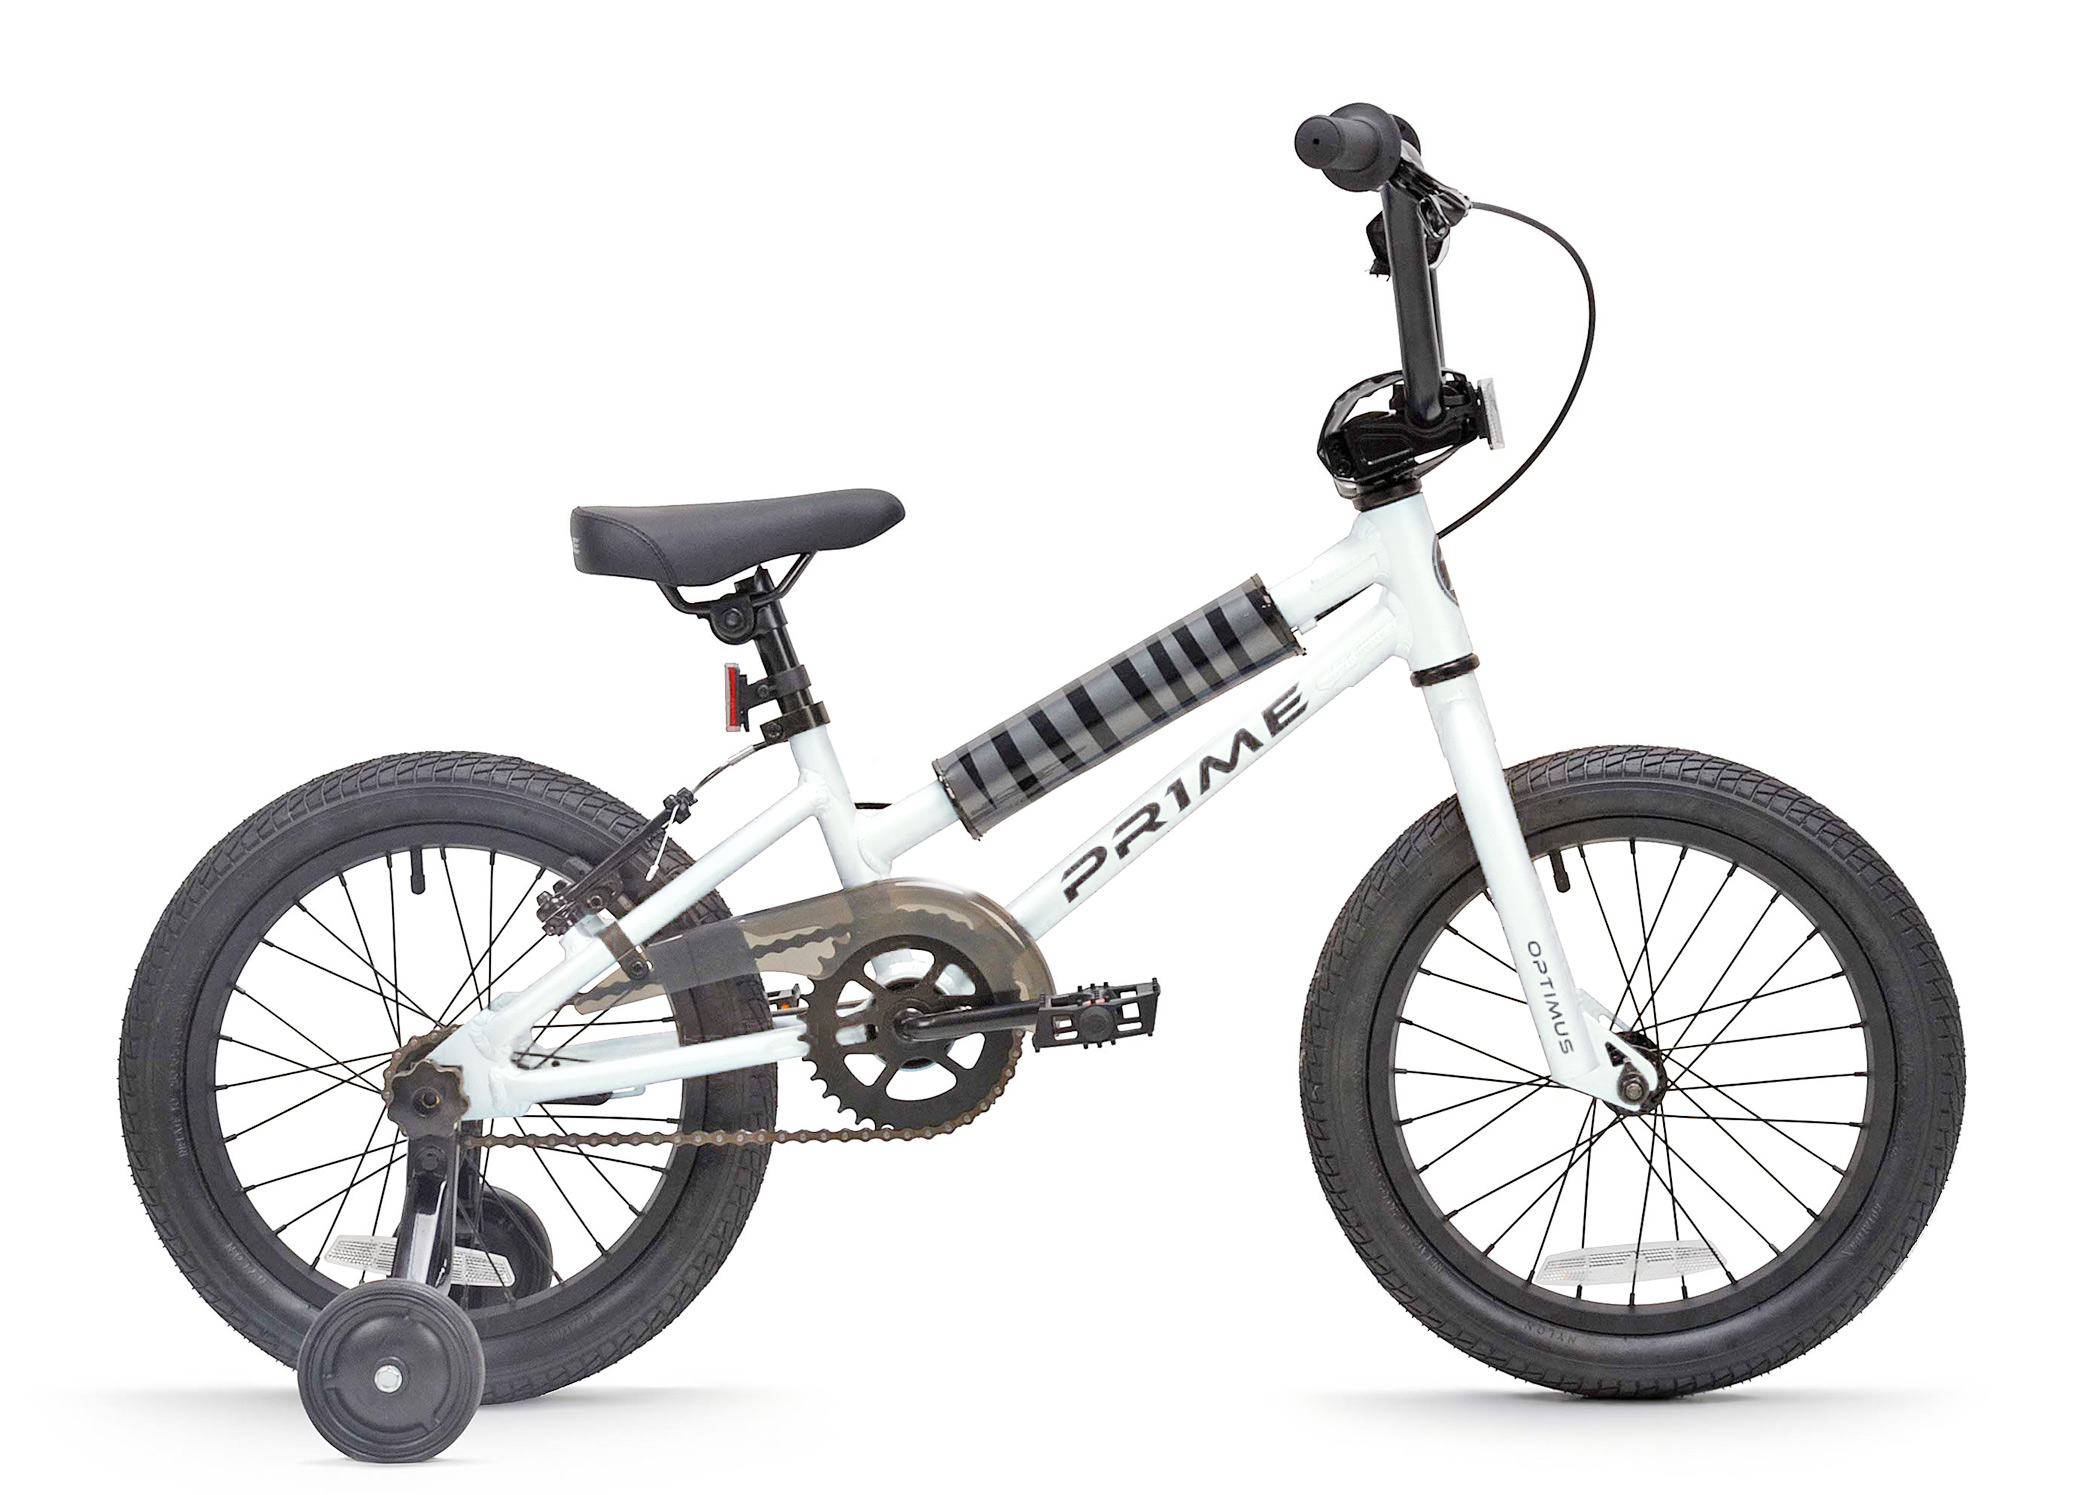 Save Up to 60% Off Bike Shop Quality Kids Bikes by PRIME Bicycles Co.